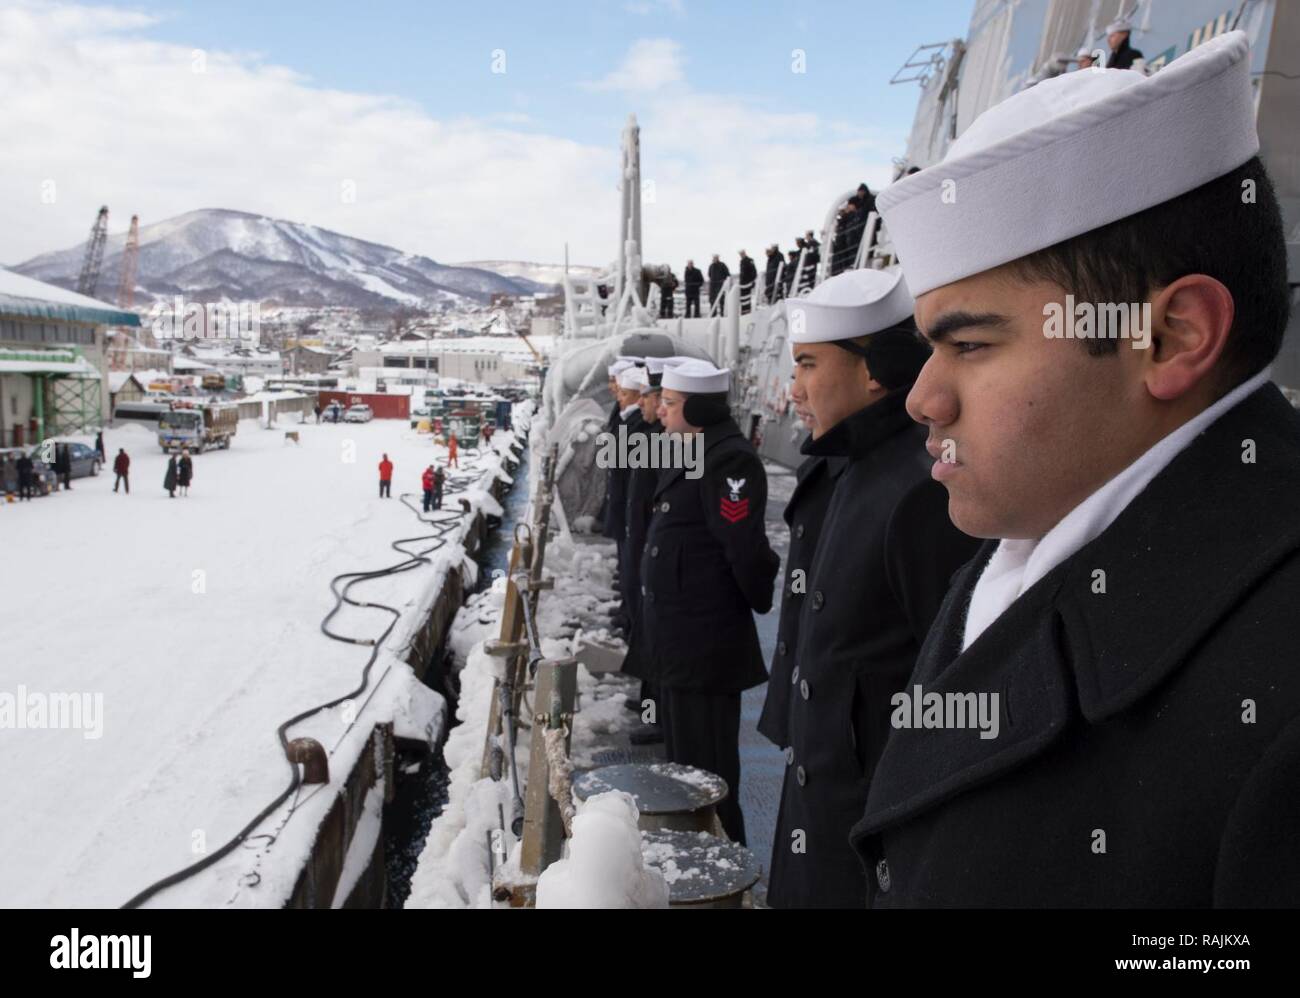 OTARU, Japan (Feb. 03, 2017) Sailors assigned to the forward-deployed Arleigh Burke-class guided-missile destroyer USS McCampbell (DDG 85) man the rails as the ship pulls into the city of Otaru. McCampbell is on patrol in the 7th Fleet area of operations in support of security and stability in the Indo-Asia-Pacific region. Stock Photo